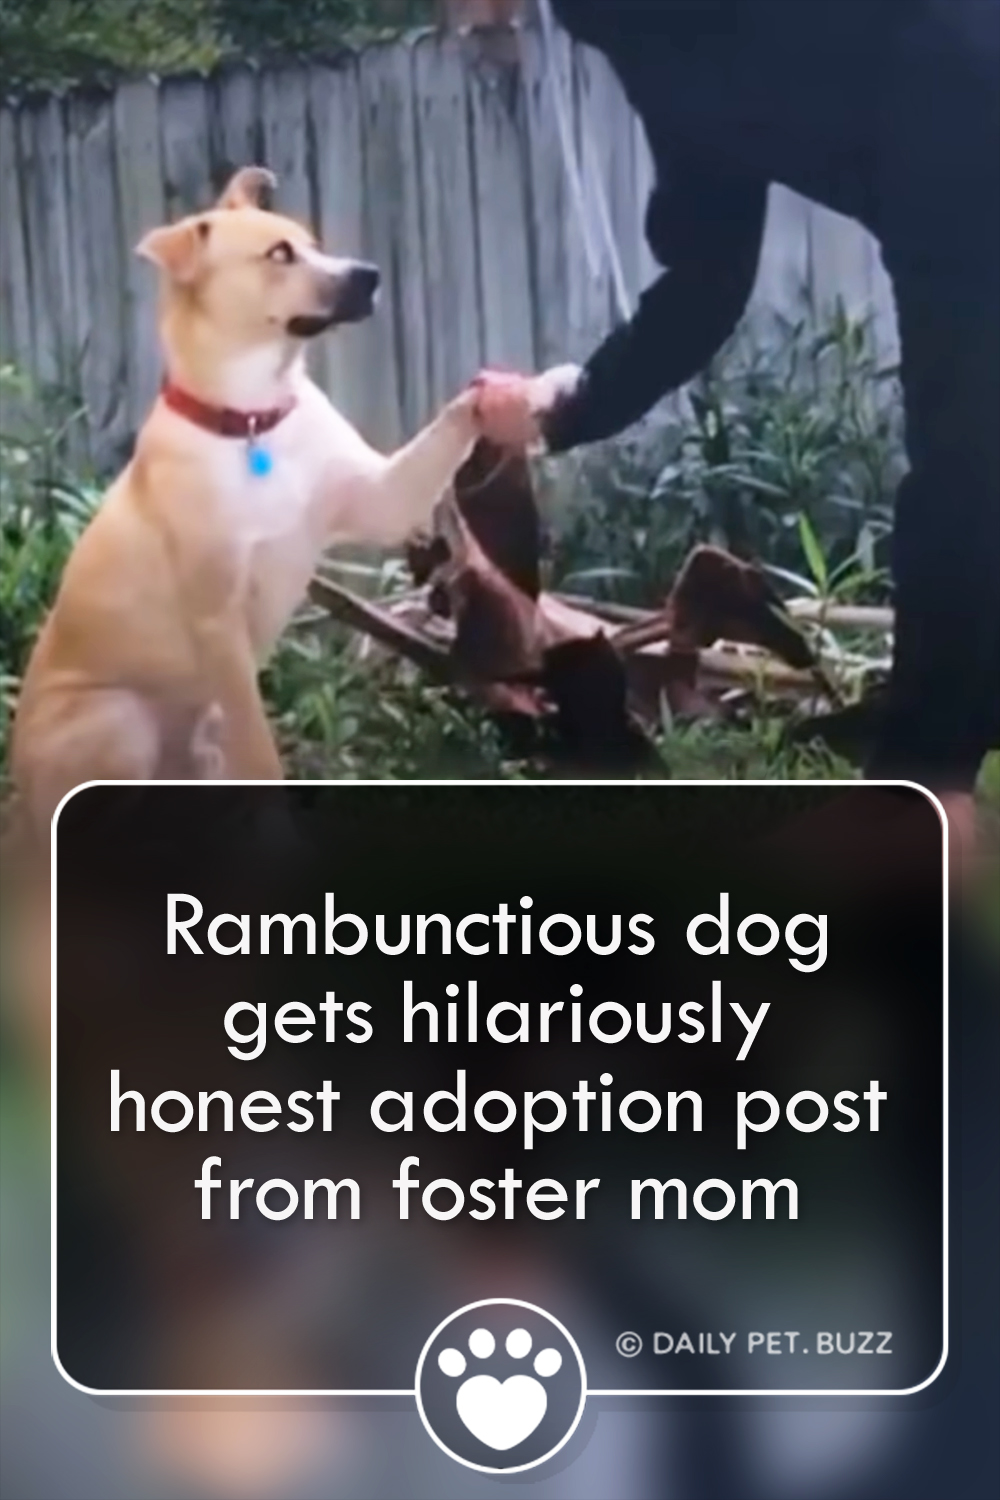 Rambunctious dog gets hilariously honest adoption post from foster mom